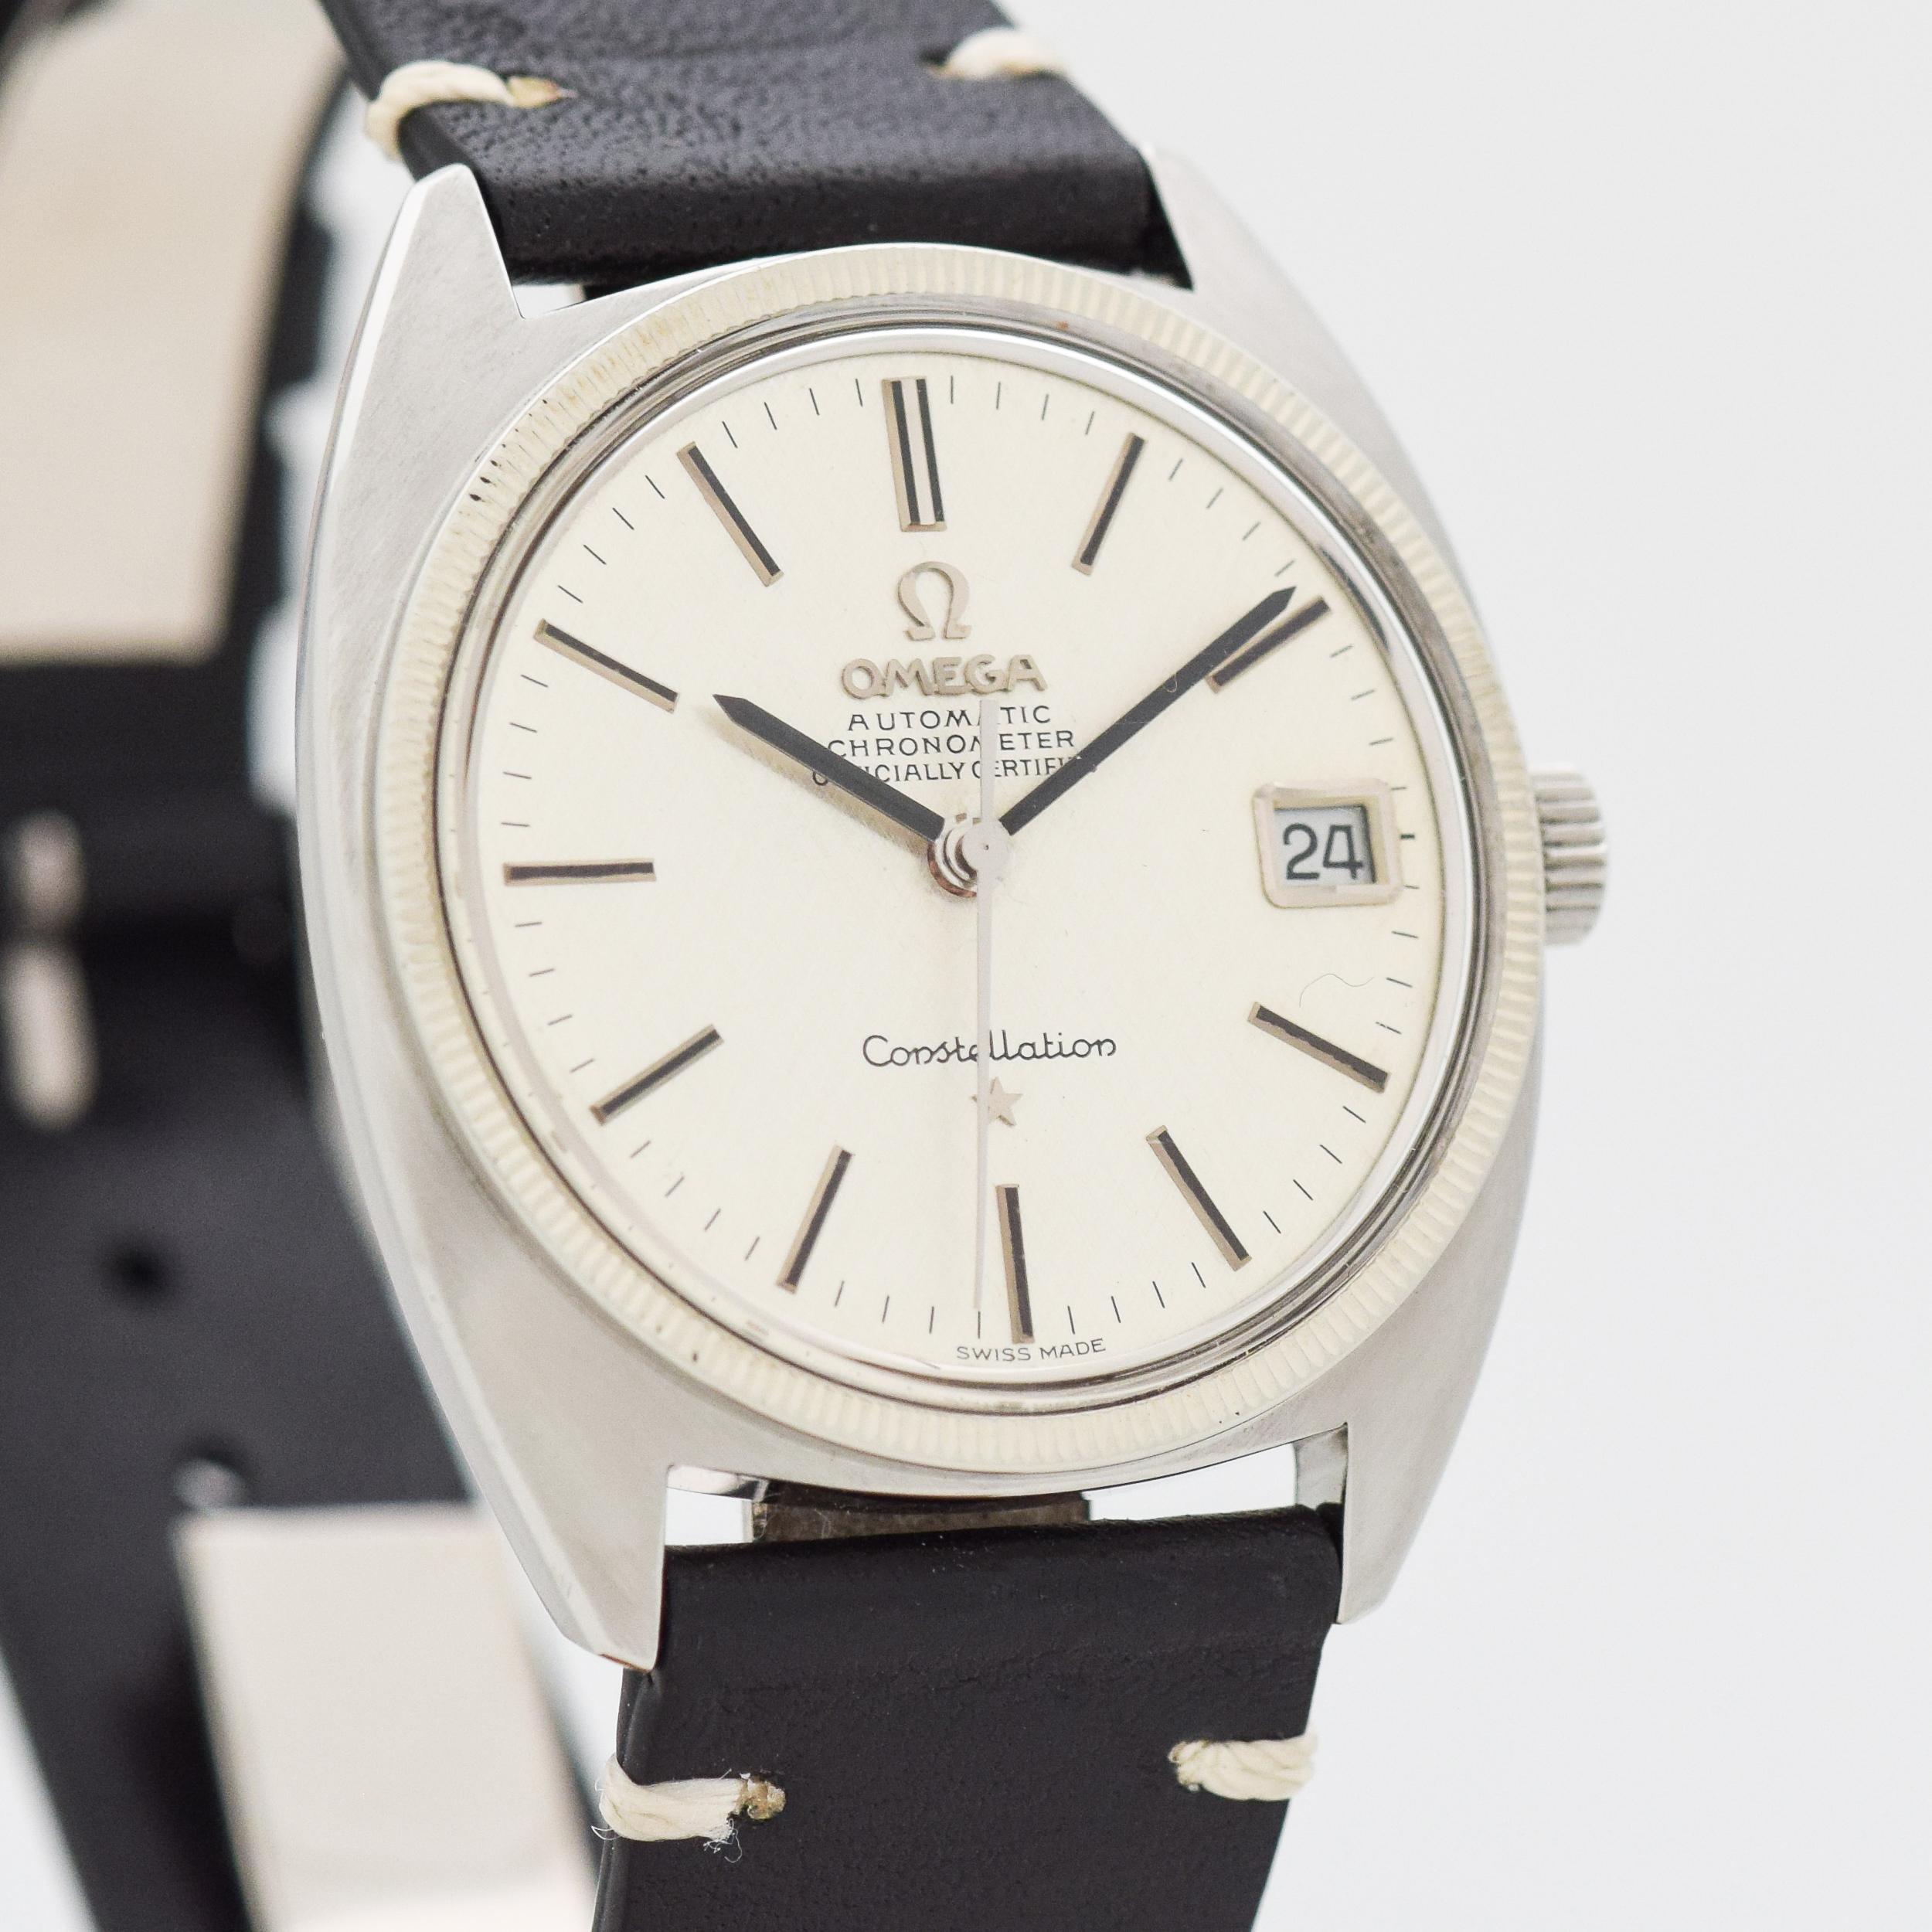 1966 Vintage Omega Constellation Chronometer Ref. 168.027 14k White Gold & Stainless Steel C-Shape watch with Original Silver Linen Textured Dial with Applied Steel Stick/Bar/Baton Markers with Black Inlay. 33mm x 39mm lug to lug (1.3 in. x 1.54